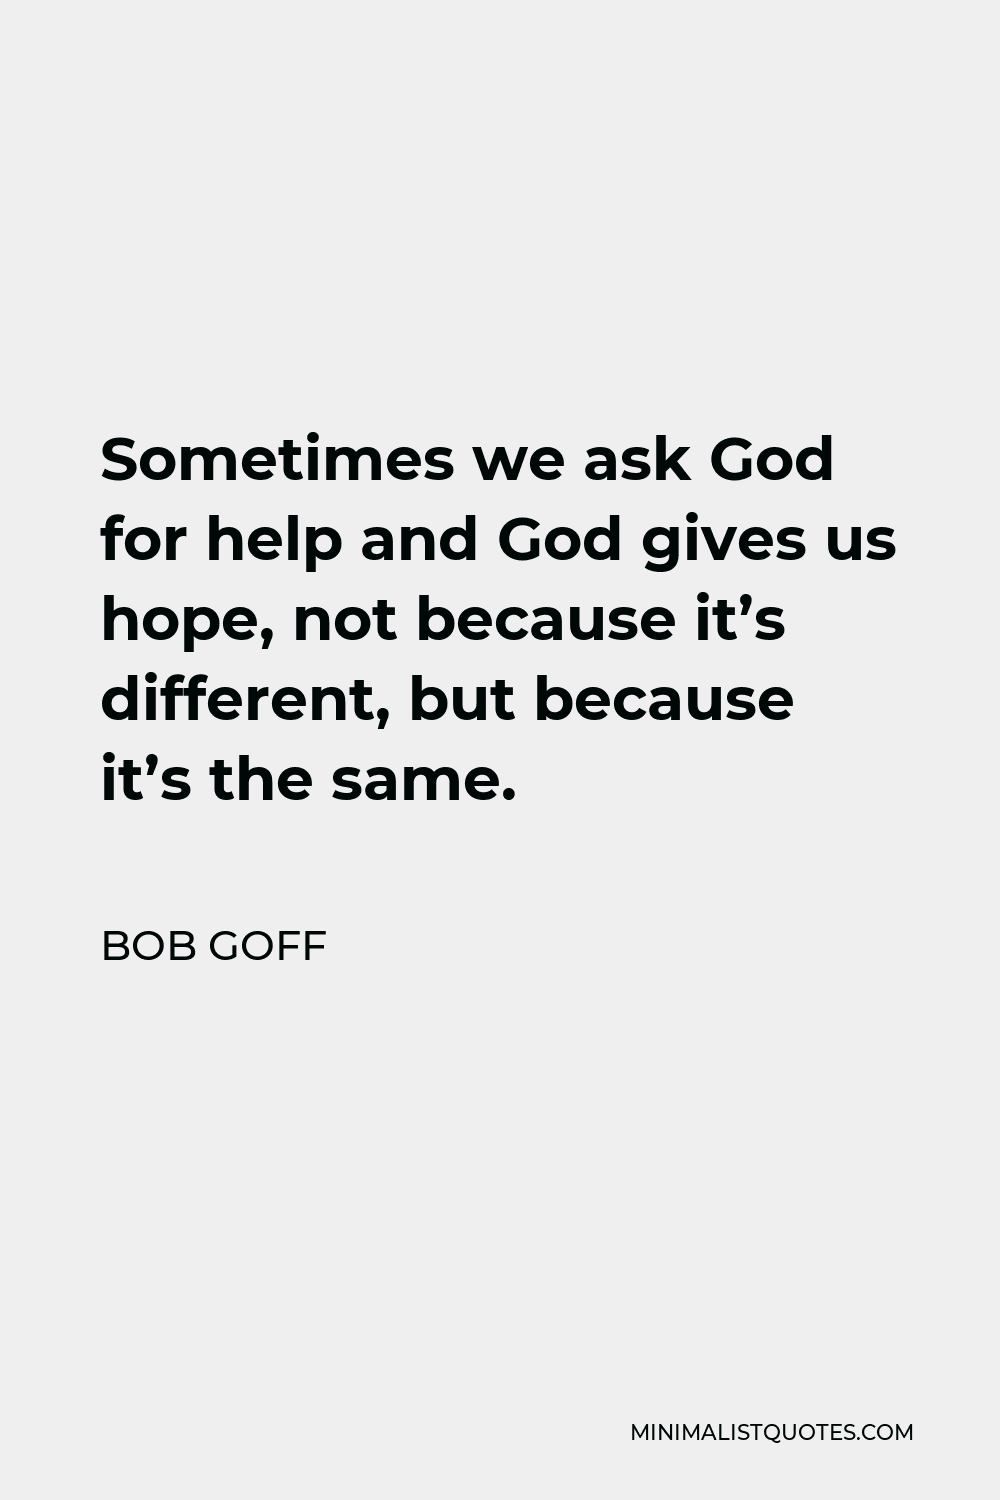 Bob Goff Quote - Sometimes we ask God for help and God gives us hope, not because it’s different, but because it’s the same.